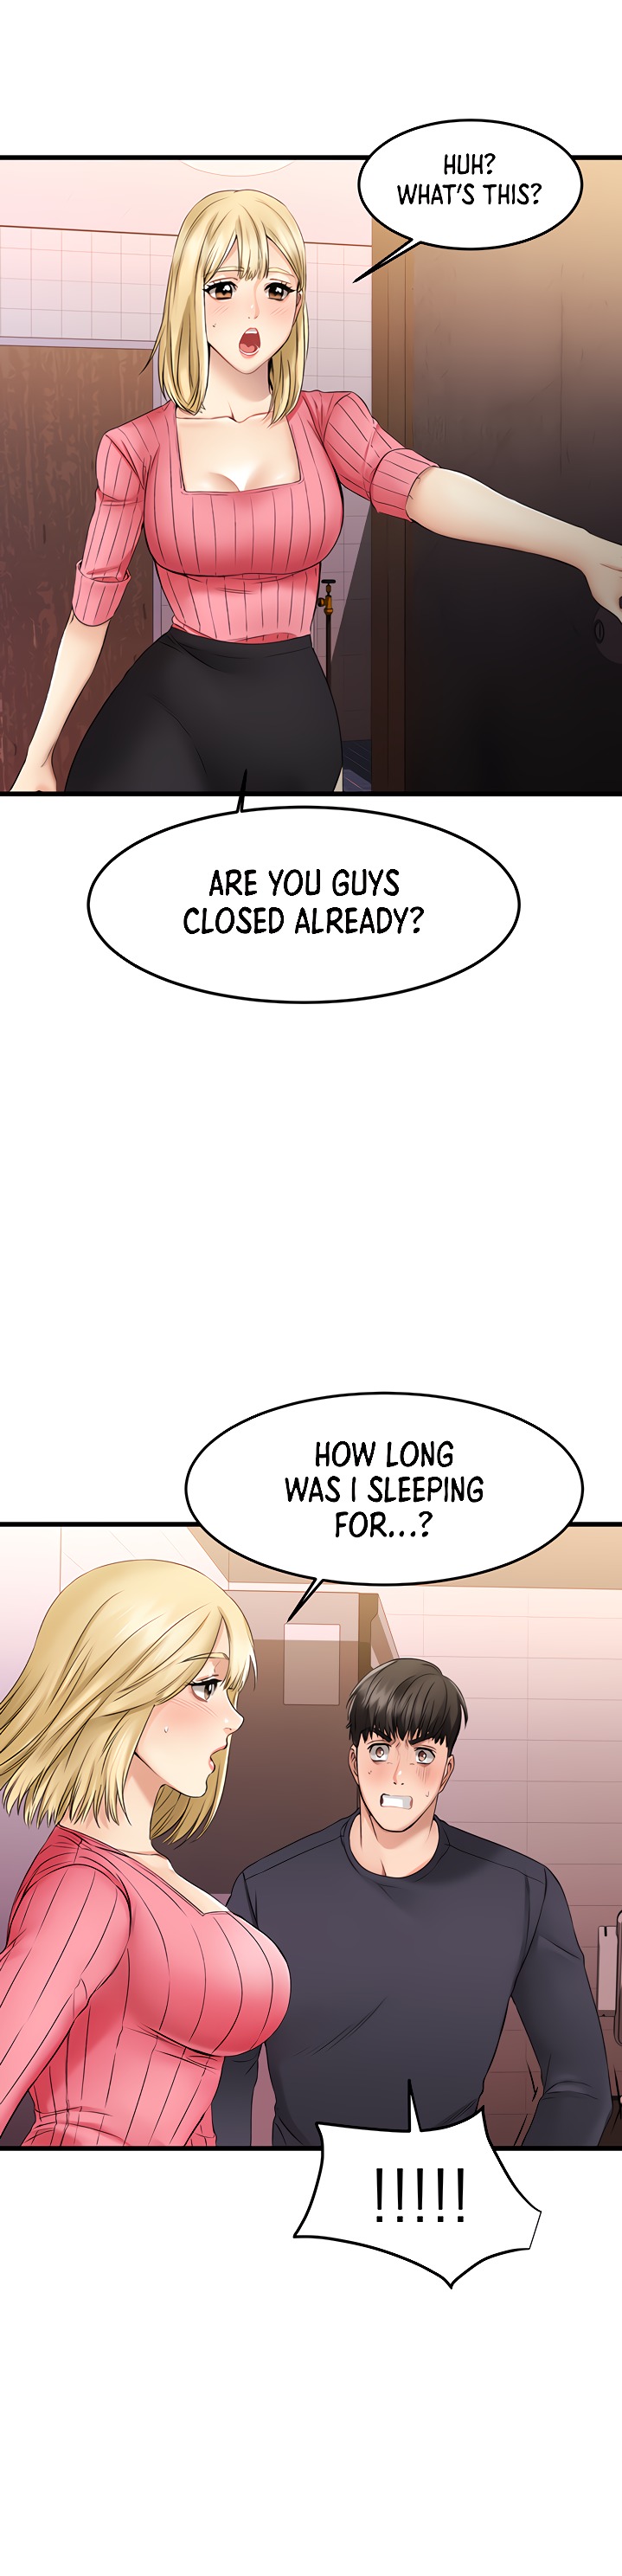 My Female Friend Who Crossed The Line - Chapter 3 Page 35